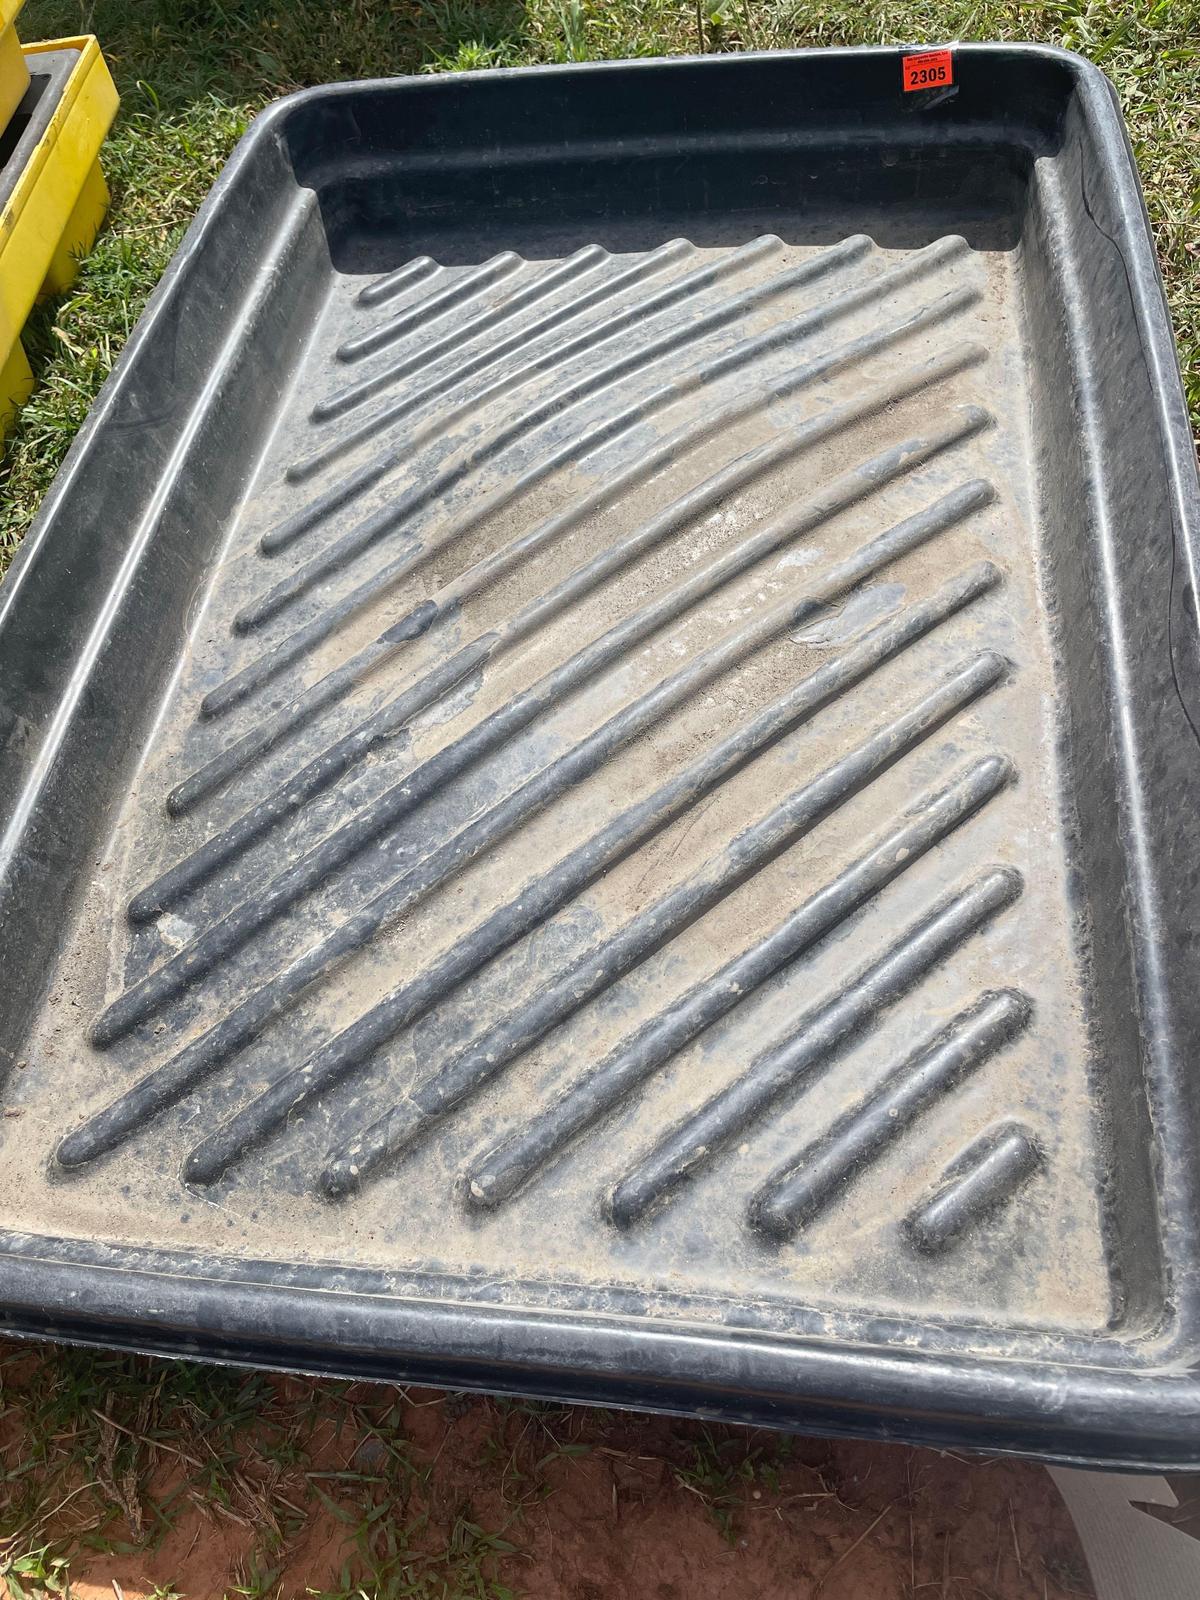 spill containment trays 41x28x5 1/2